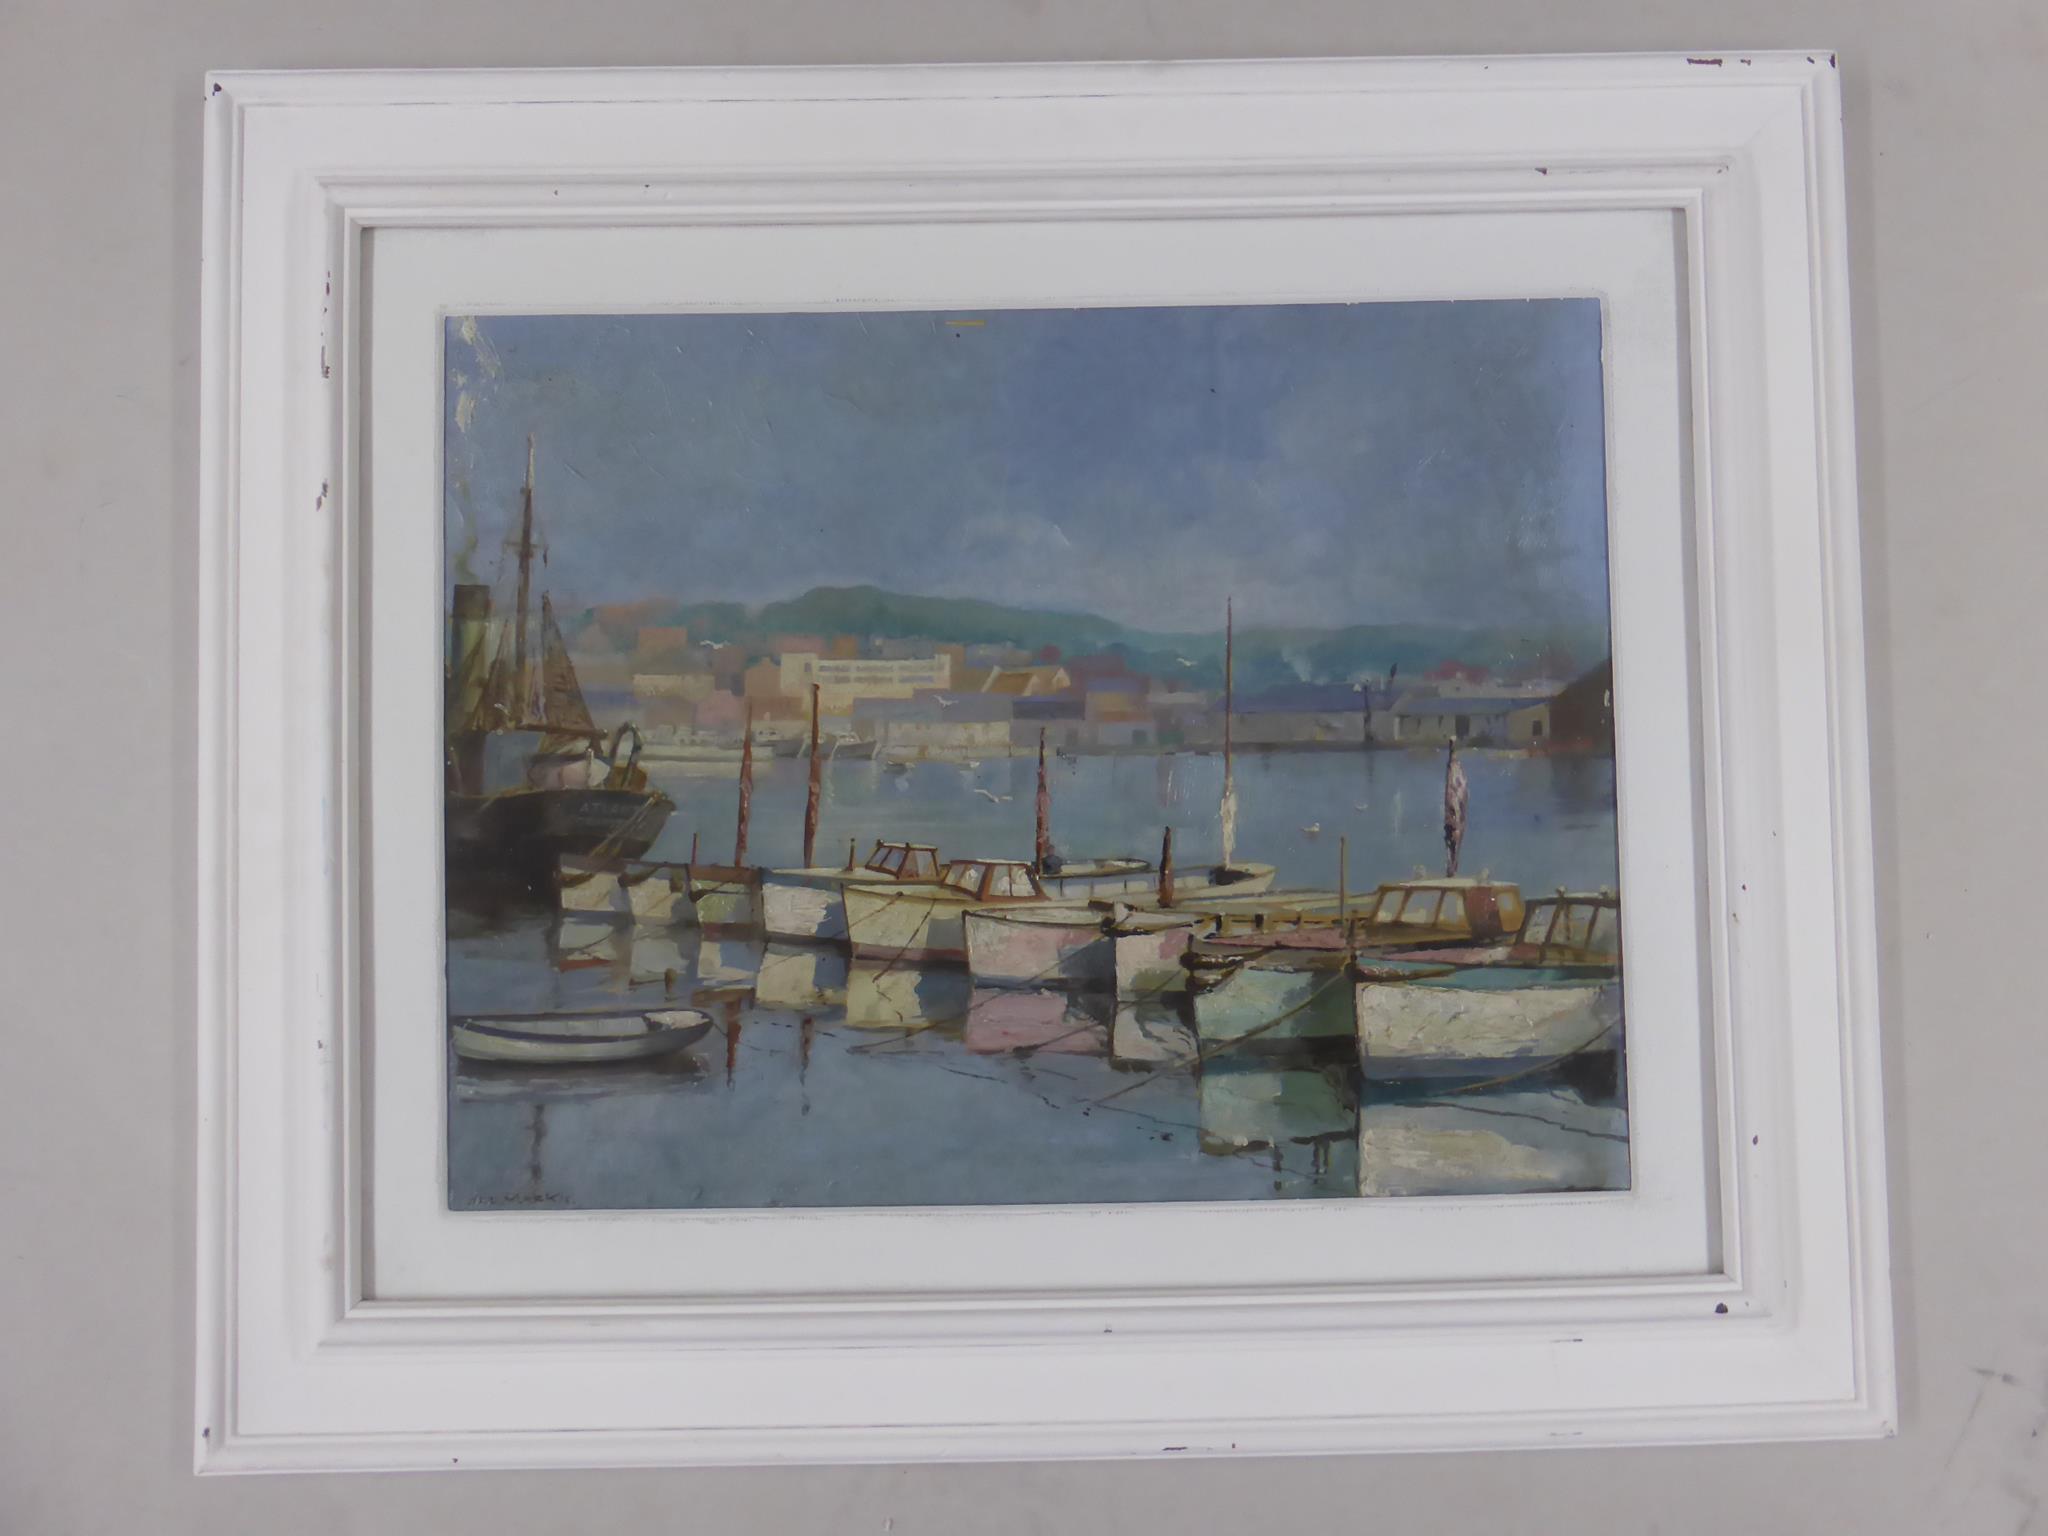 J M S MACKIE, OIL ON BOARD DEPICTING FISHING BOATS, APPROX. 47 X 34 cm